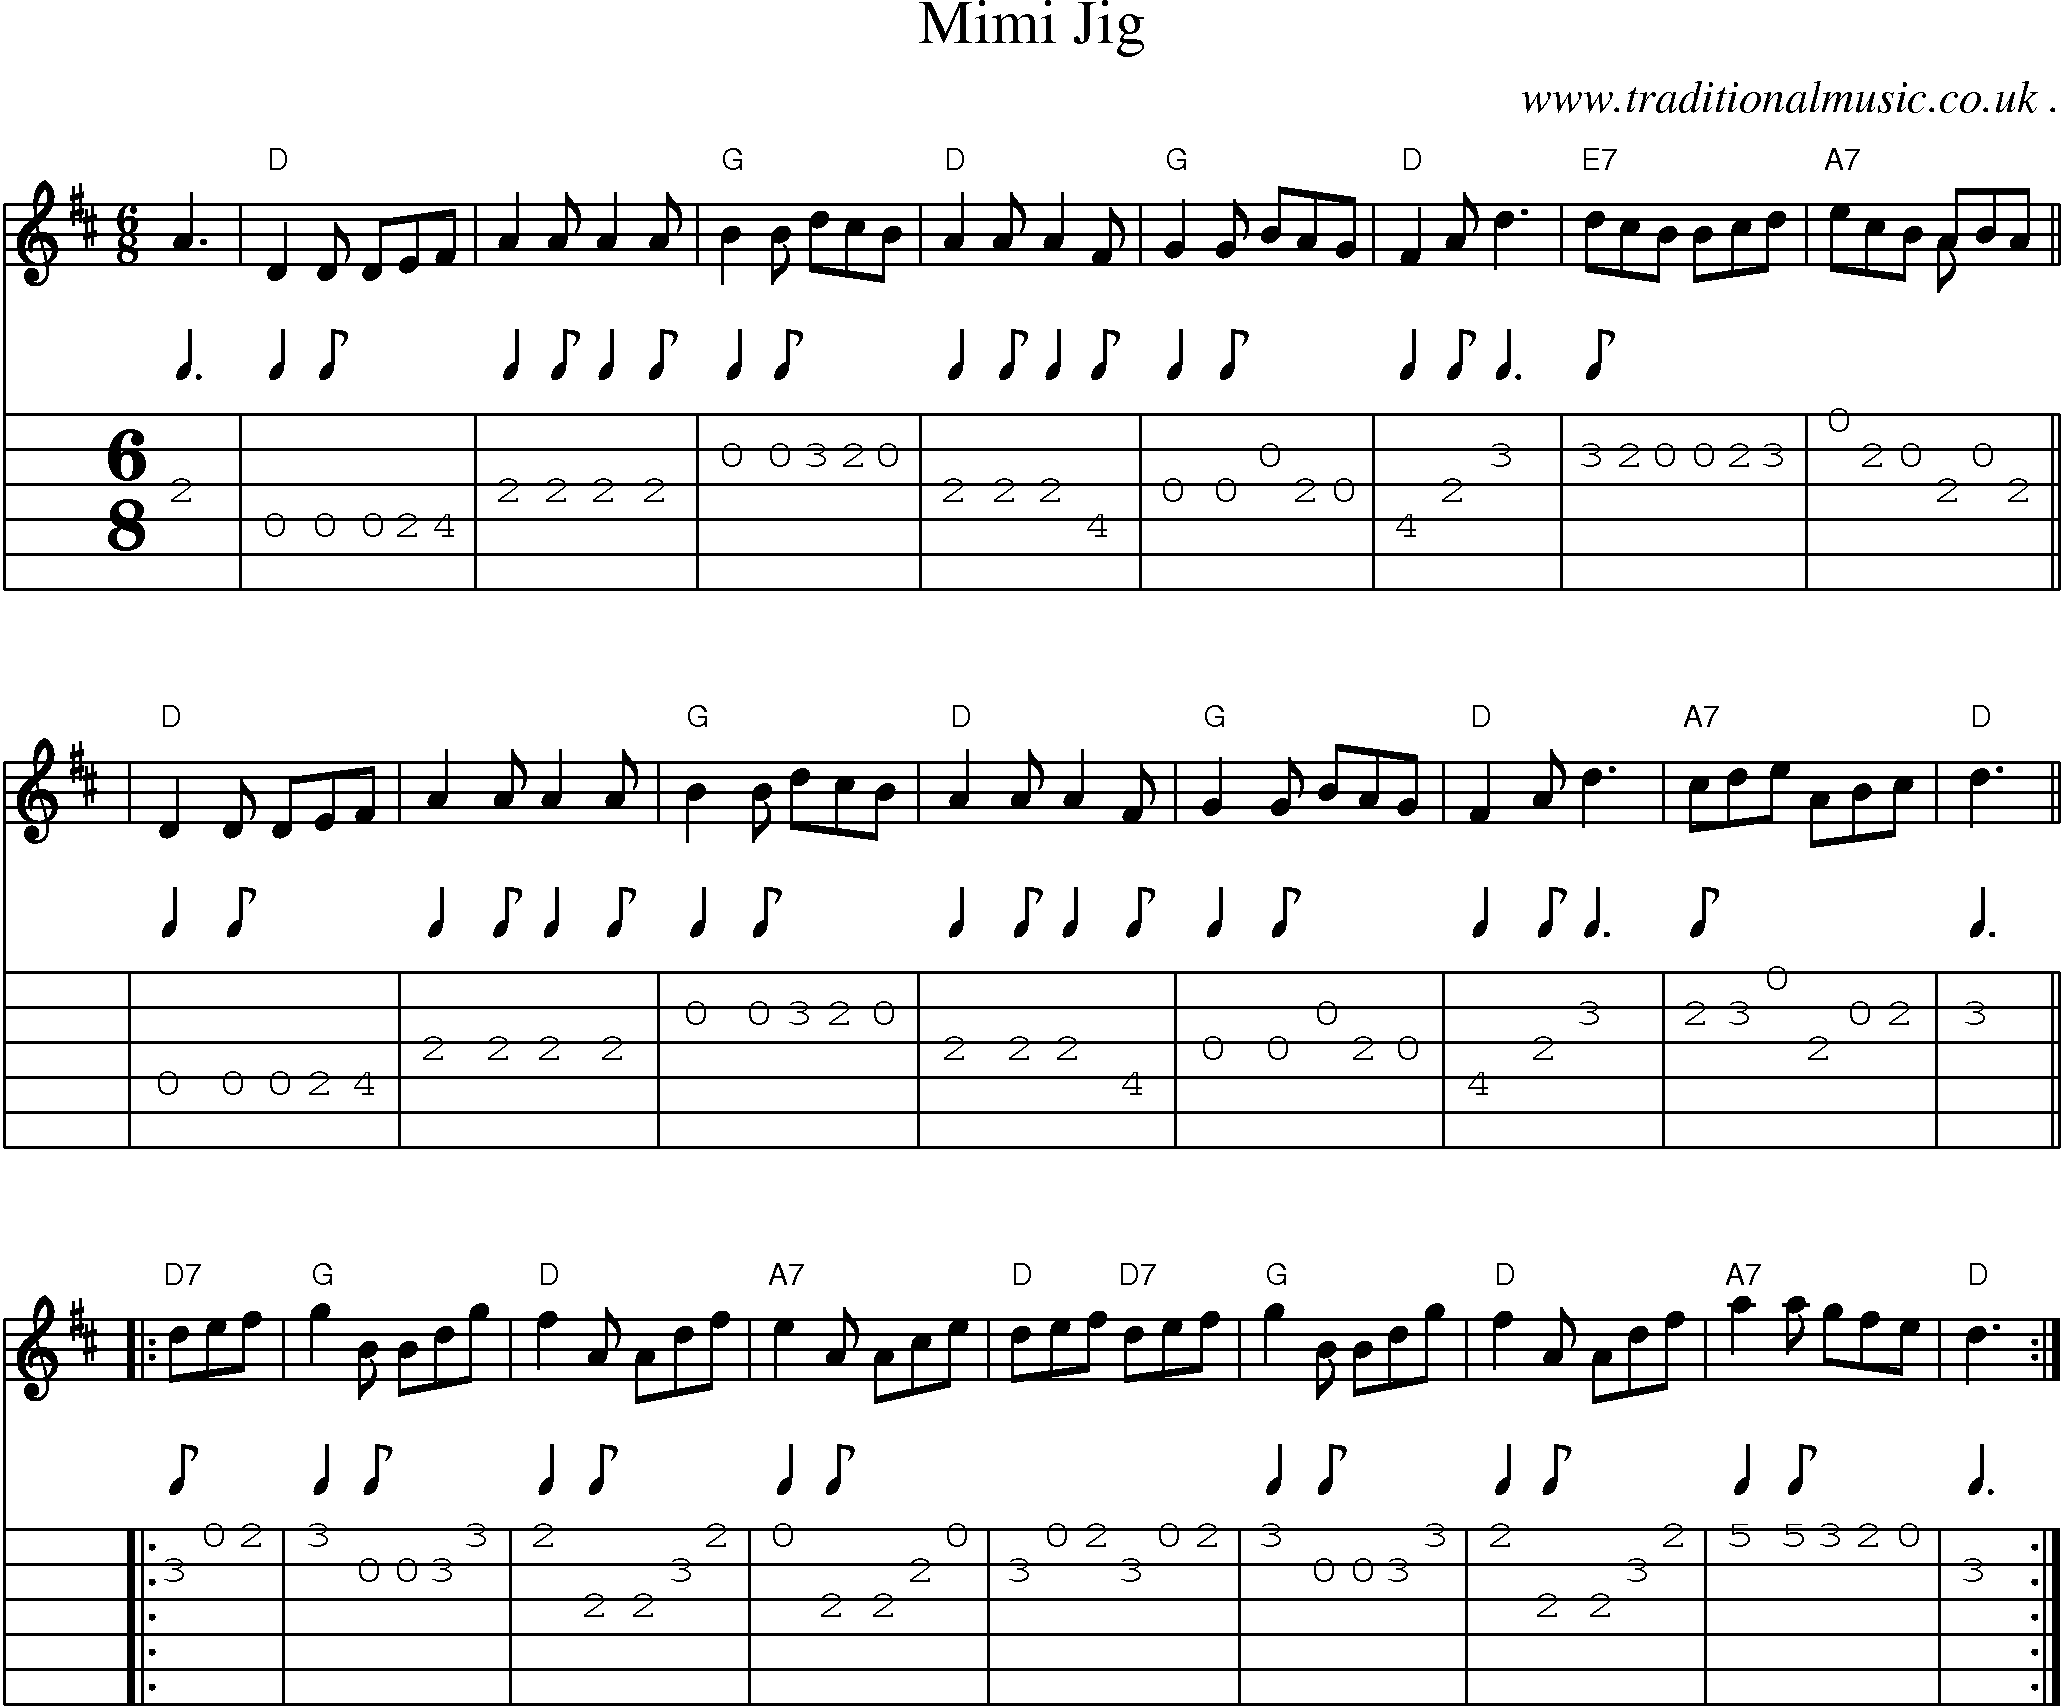 Sheet-music  score, Chords and Guitar Tabs for Mimi Jig